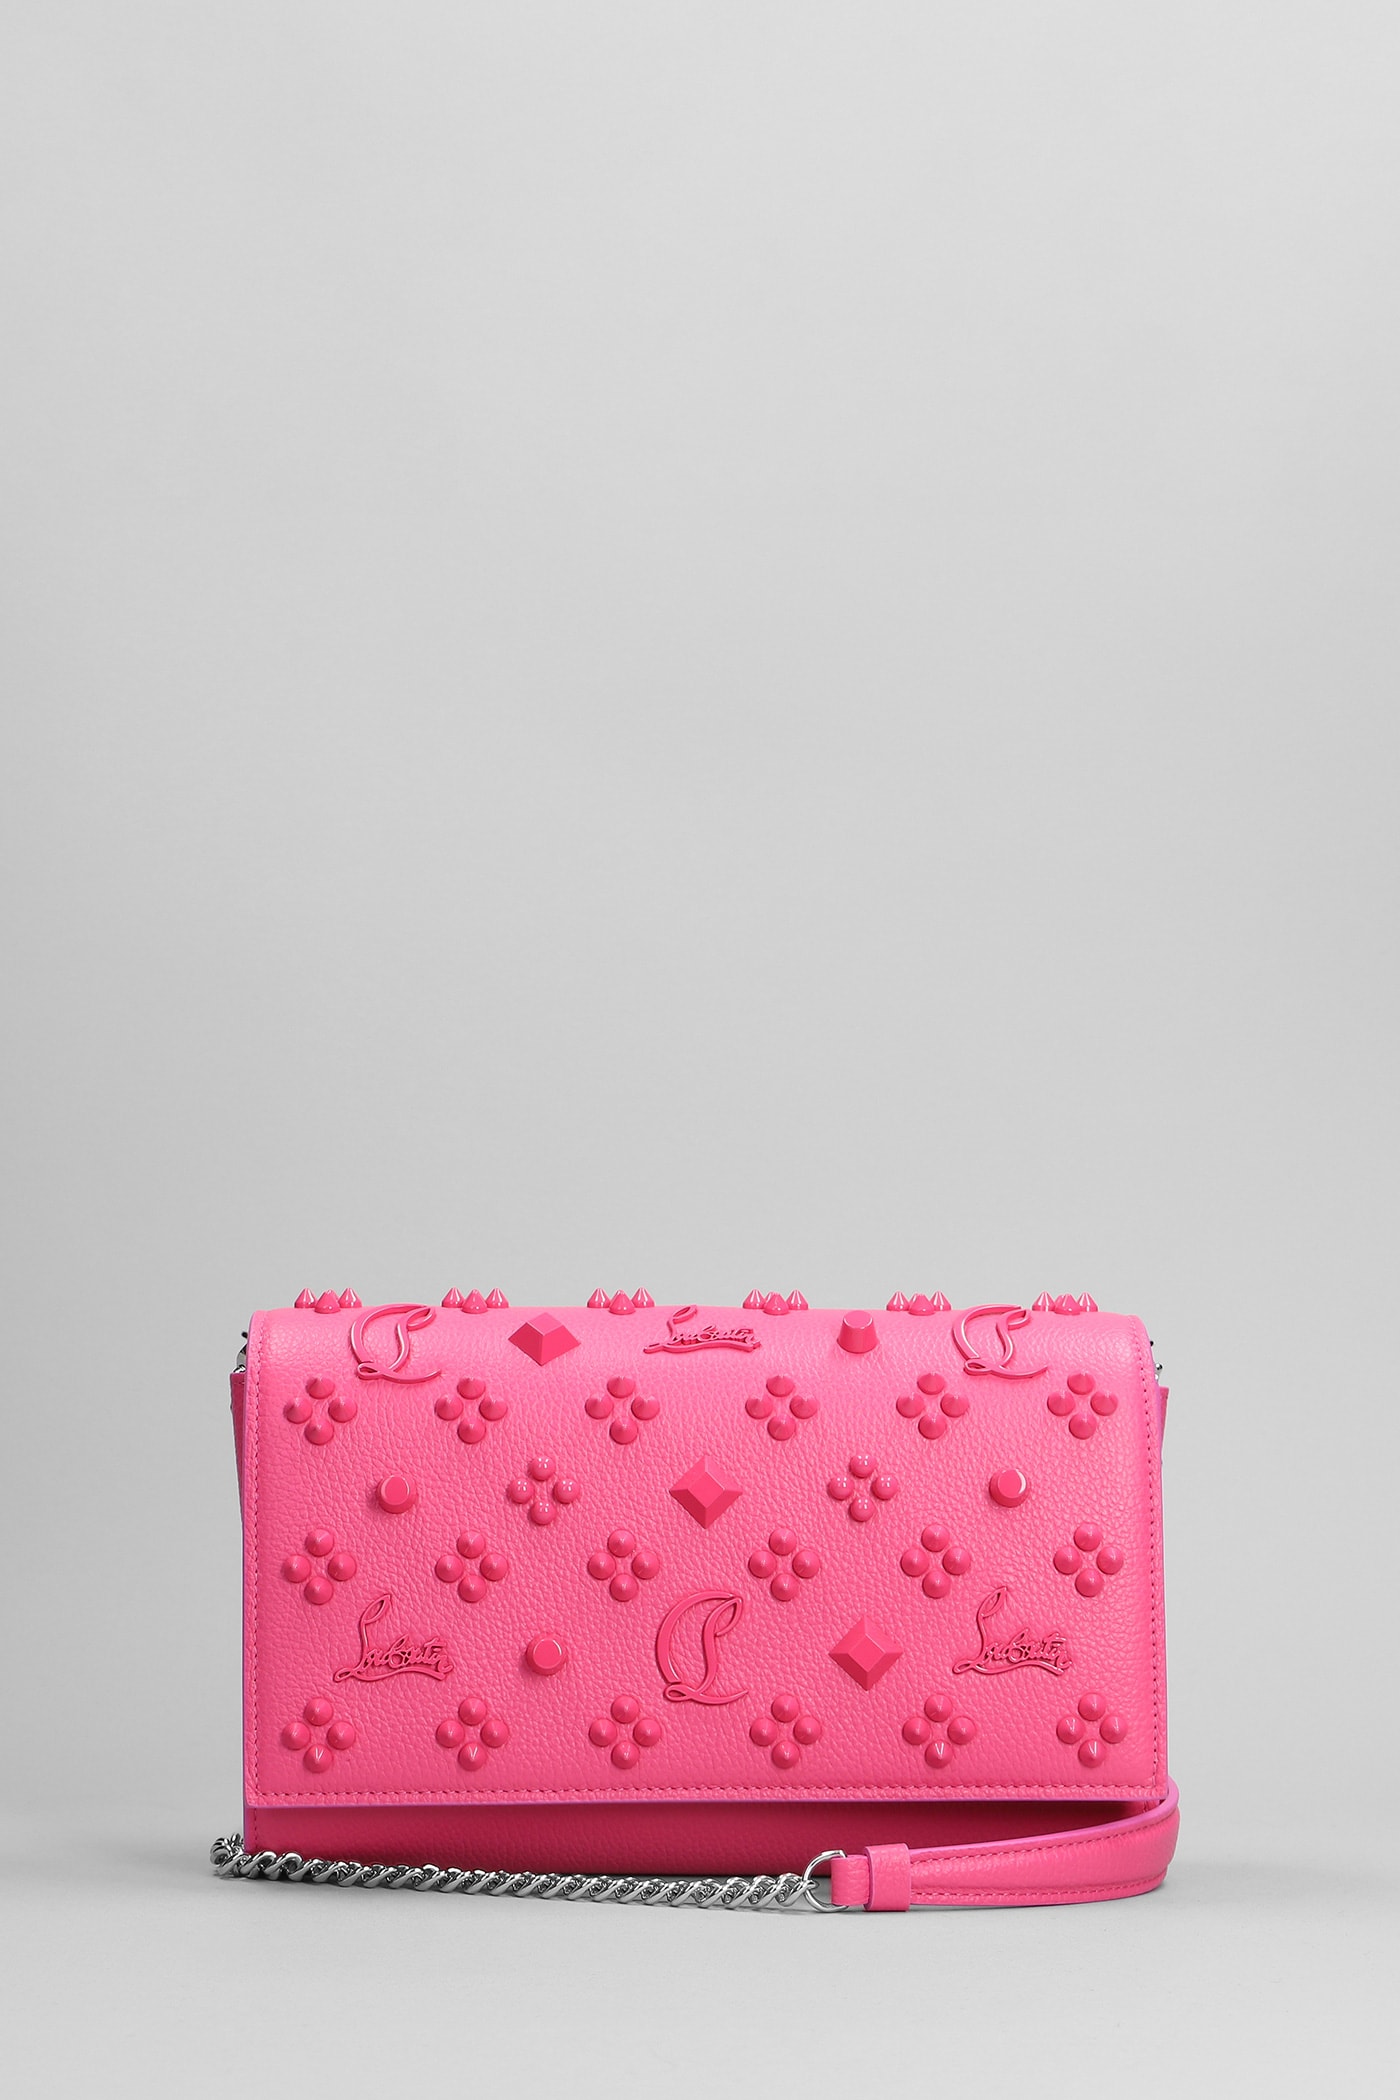 Christian Louboutin Paloma Clutch Hand Bag In Rose-pink Leather